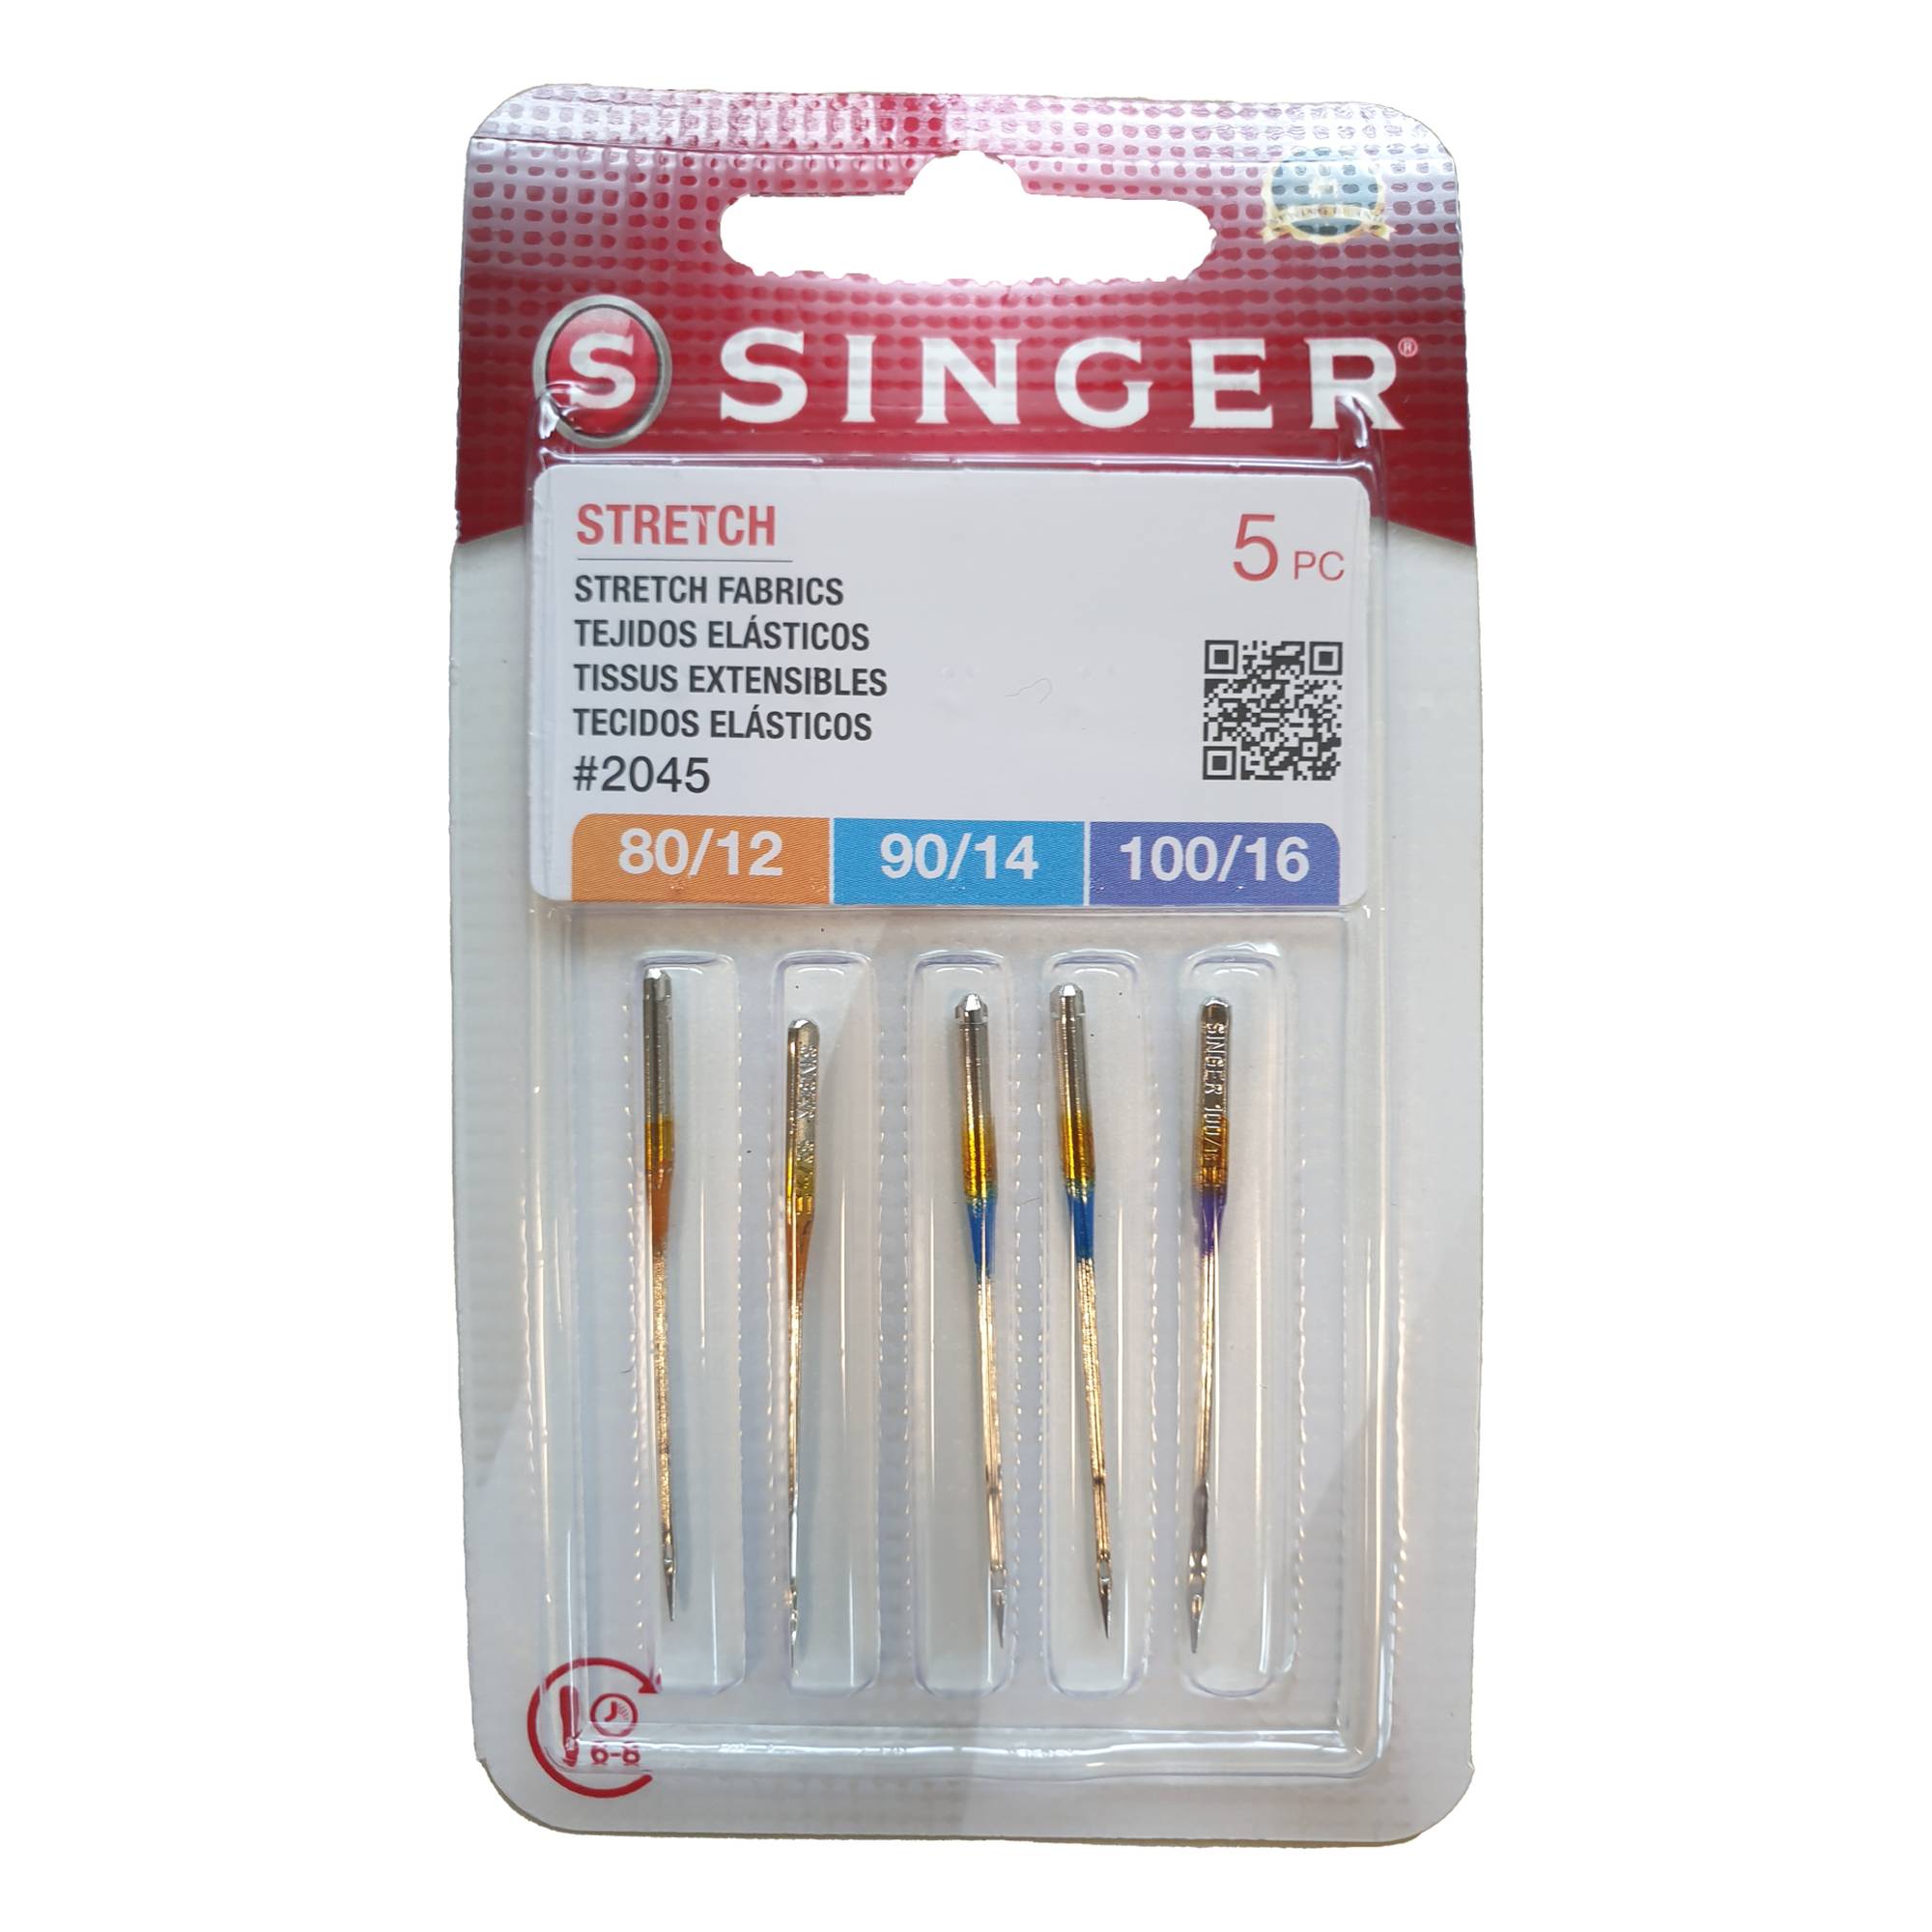 SINGER Regular Ball Point Sewing Machine Needles, Size 90/14 - 4 Count 